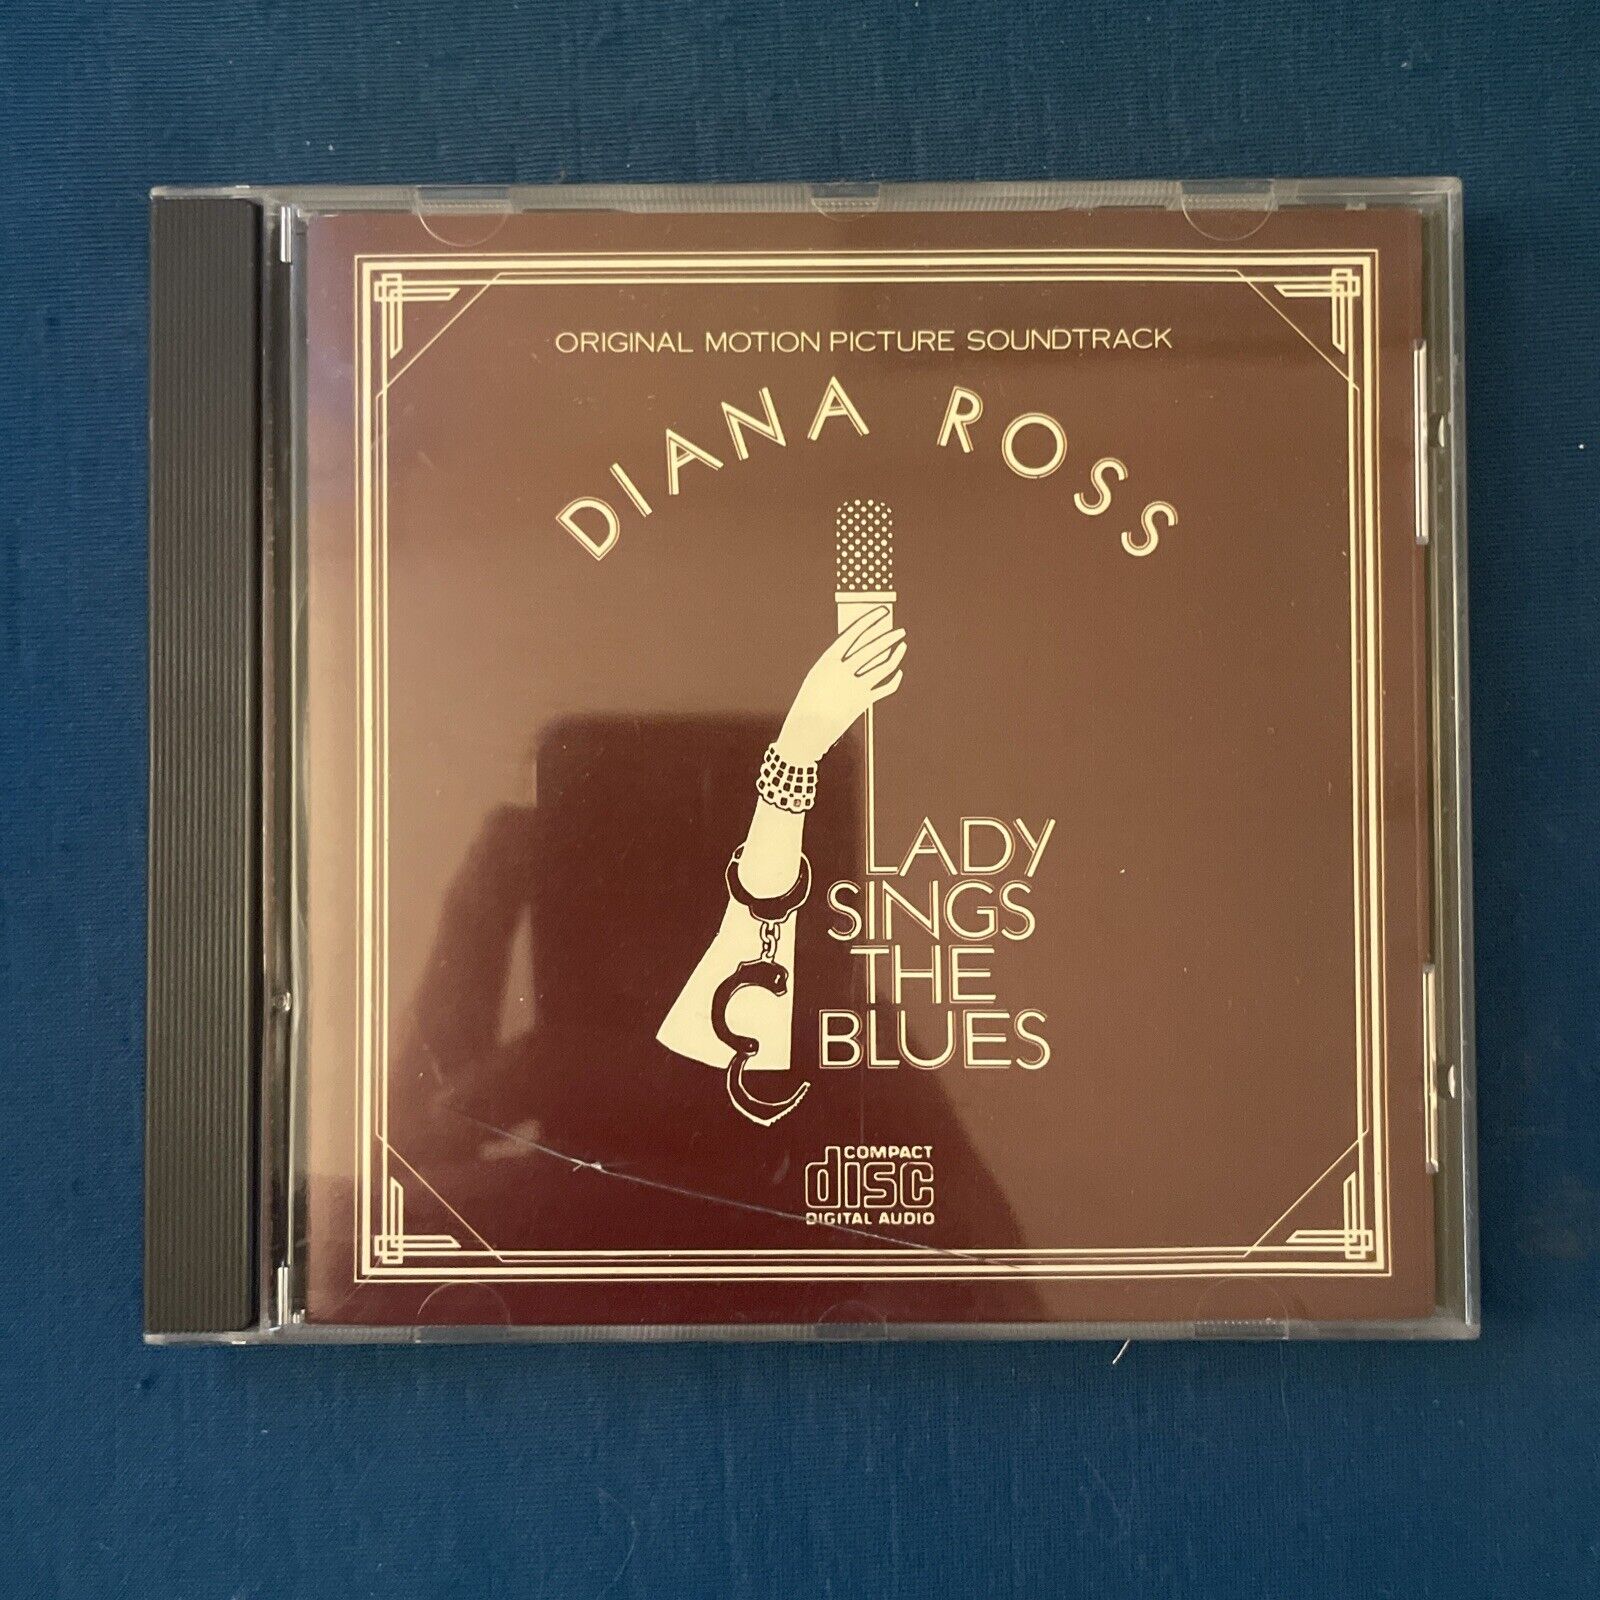 Diana Ross - Lady Sings The Blues Original Picture Soundtrack (CD, 1972, Motown)